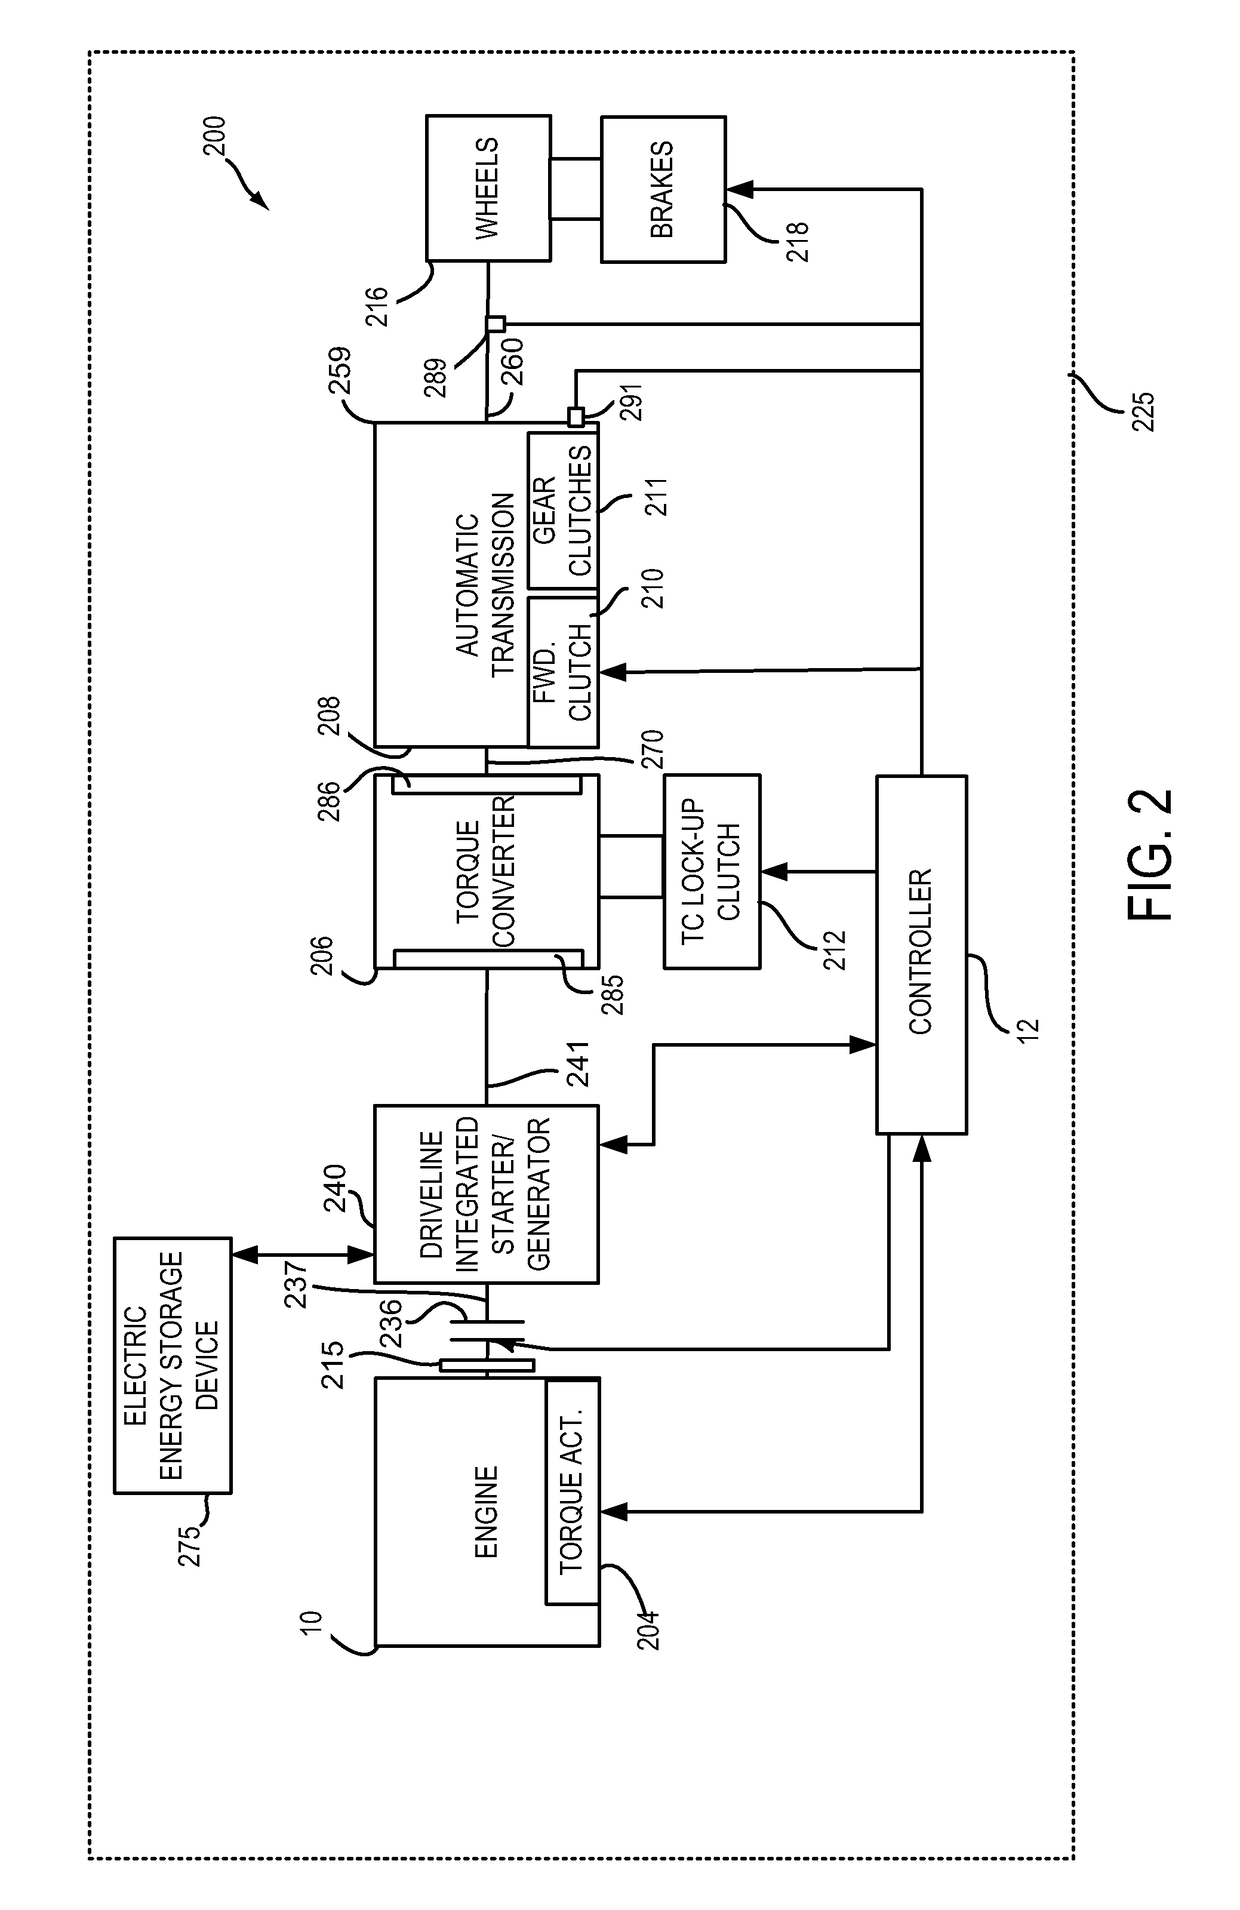 Methods and system for starting an engine of a hybrid vehicle